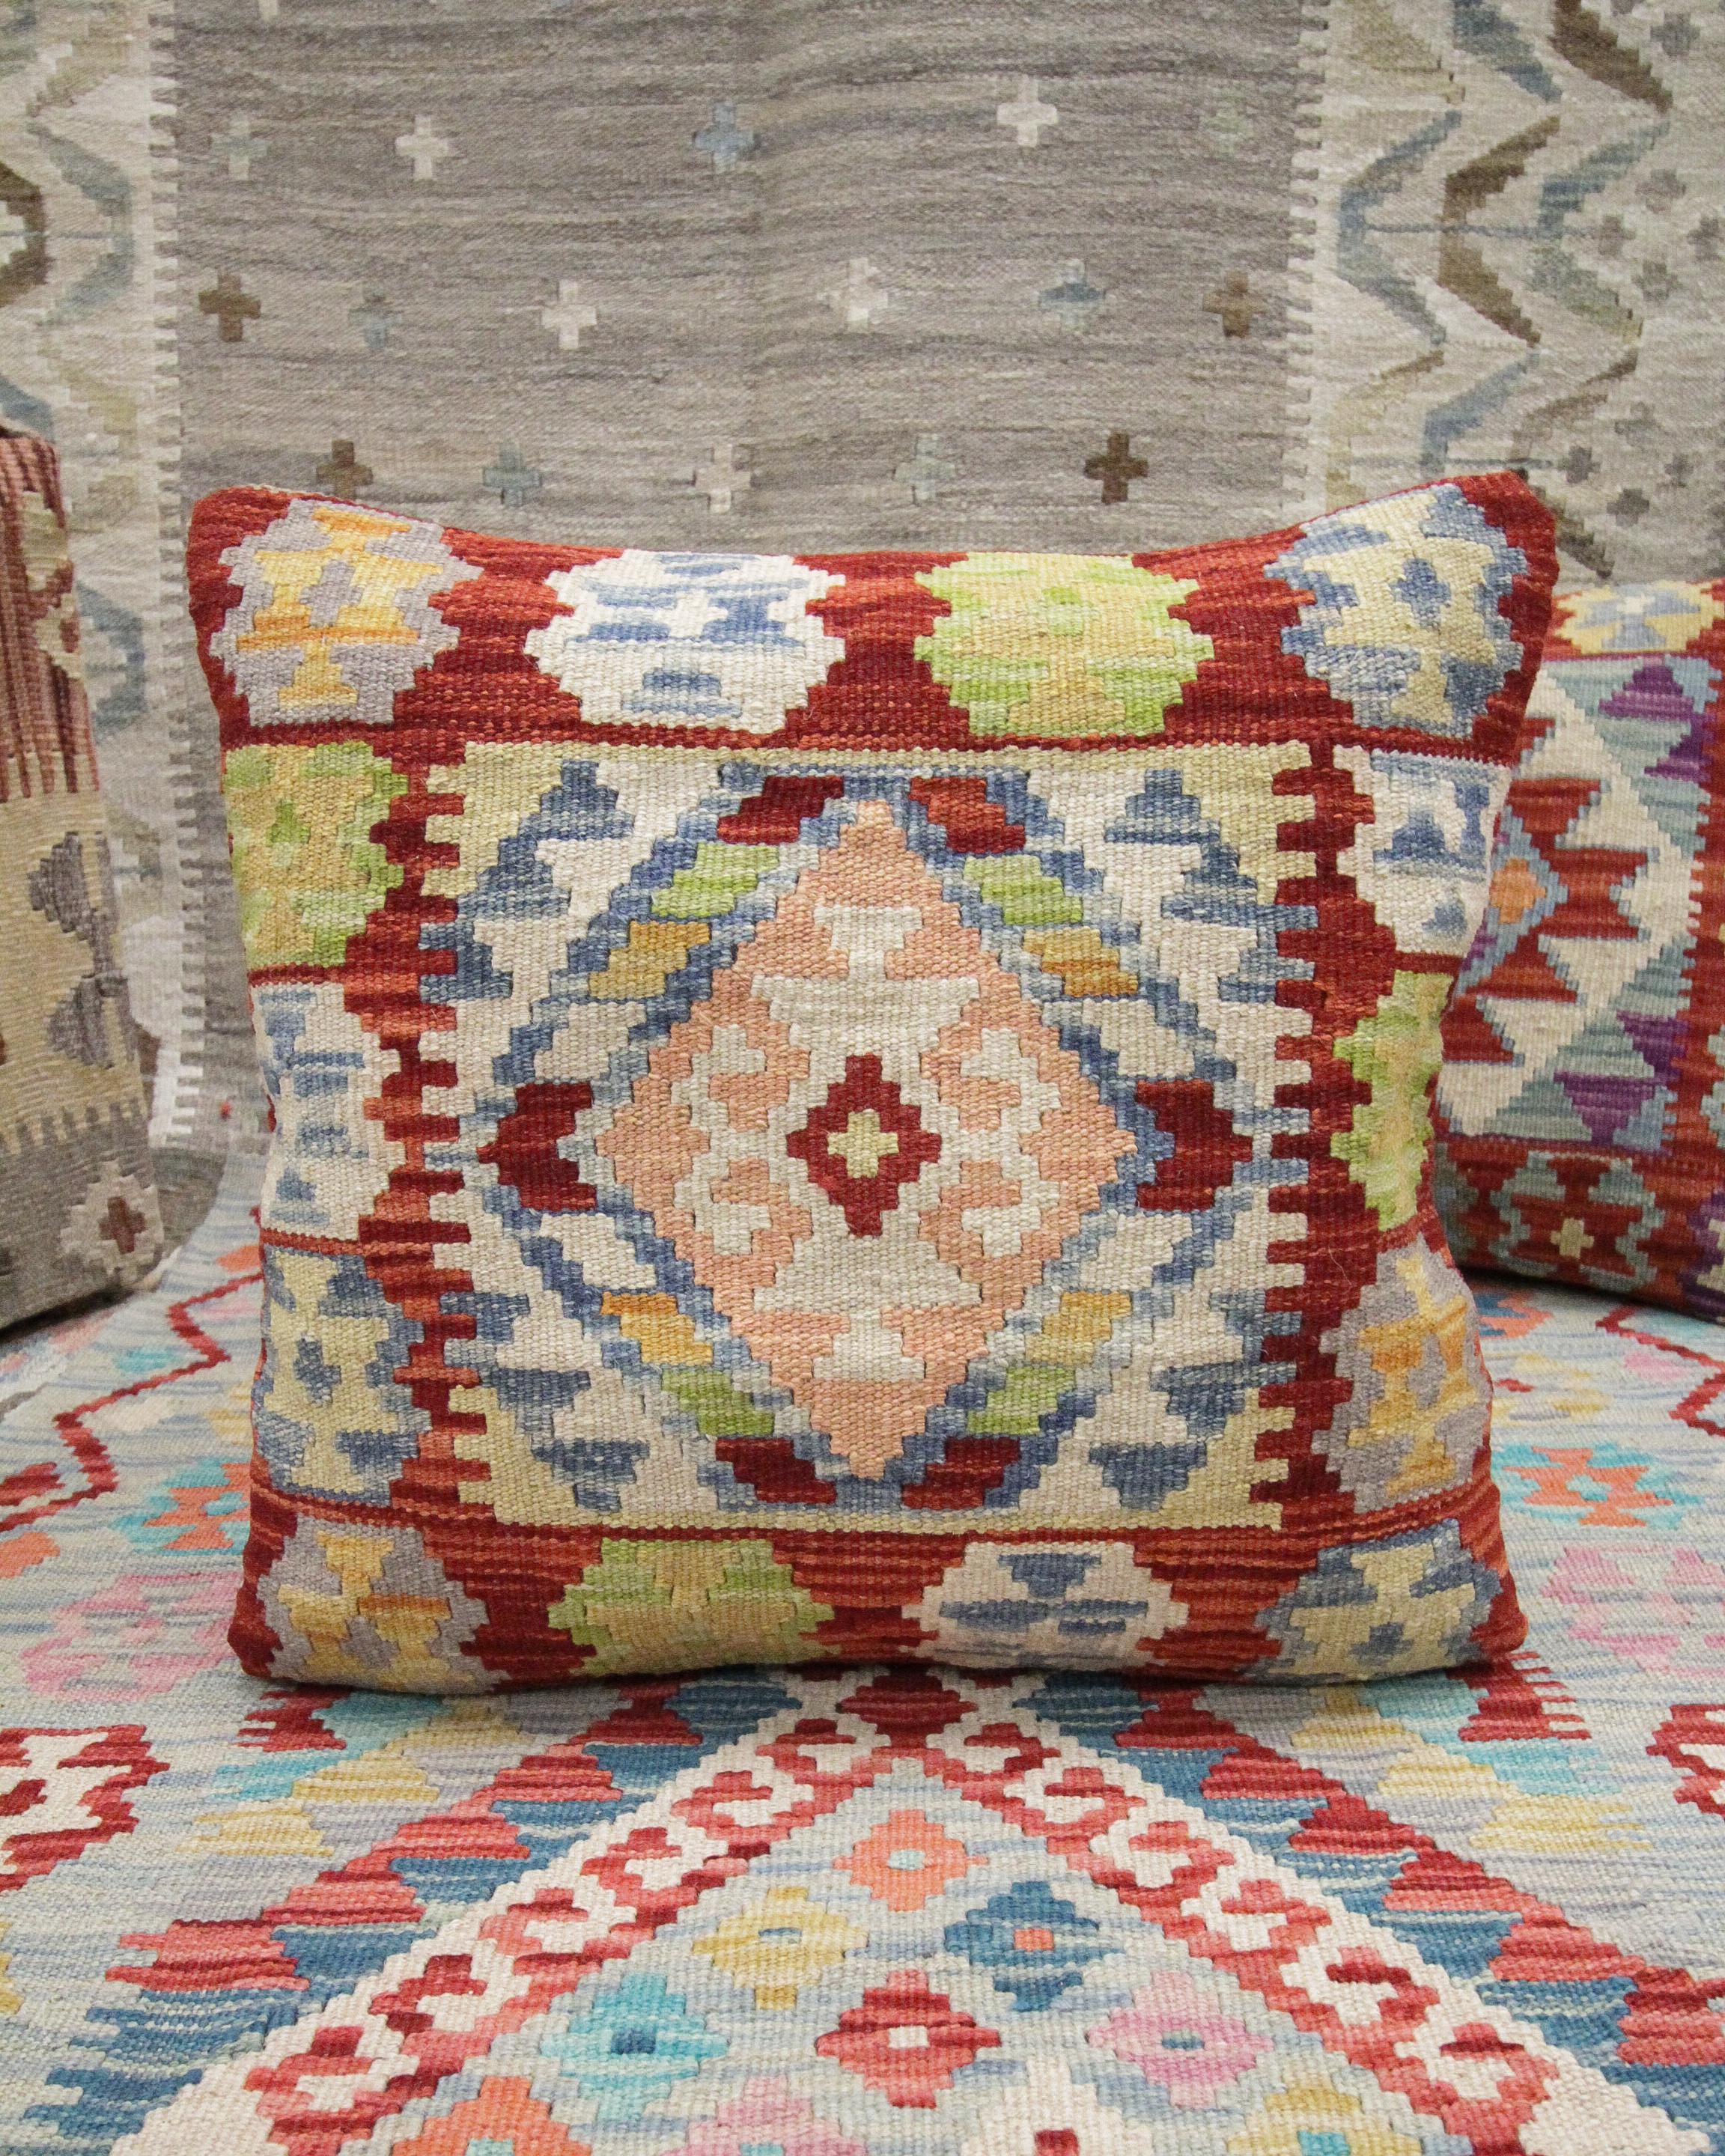 This new traditional Kilim cushion cover is a handwoven piece constructed in the early 21st century. The design has been delicately woven by hand and features a symmetrical geometric pattern that is sure to Stand out on any sofa or armchair! This